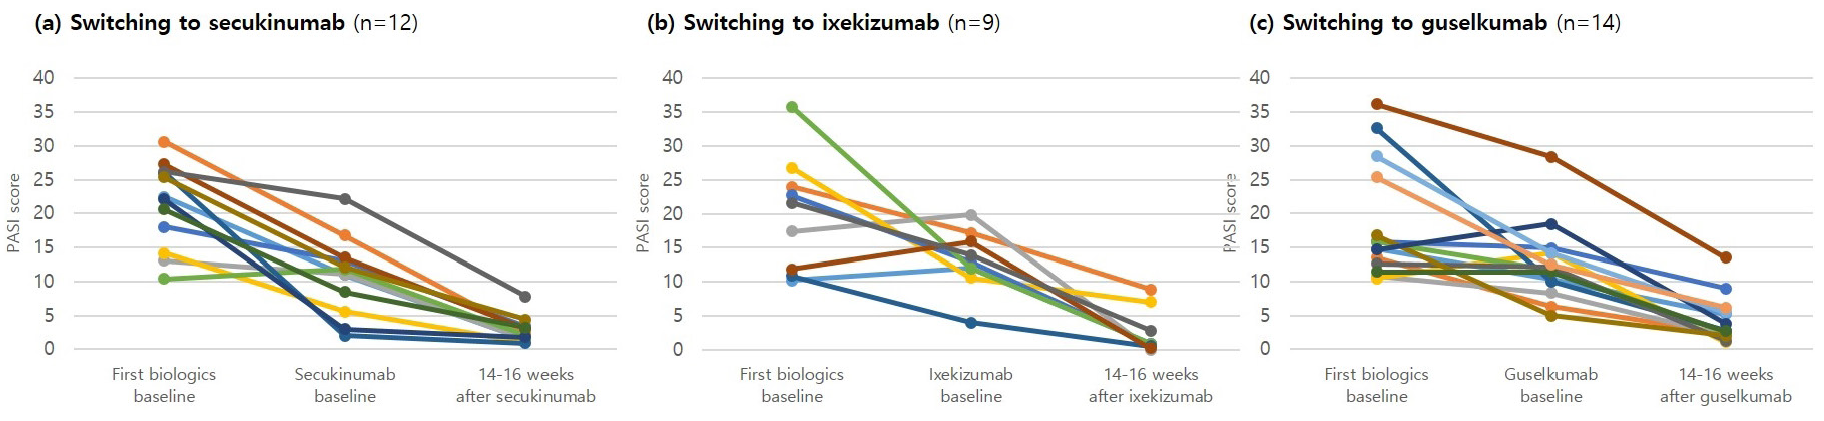 PASI score at baseline of the first and second biologics and after 14–16 weeks of using the second biologics in each patients who switched biologics. Second biologics as follows: (a) secukinumab (n = 12), (b) ixekizumab (n = 9), (c) guselkumab (n = 14)